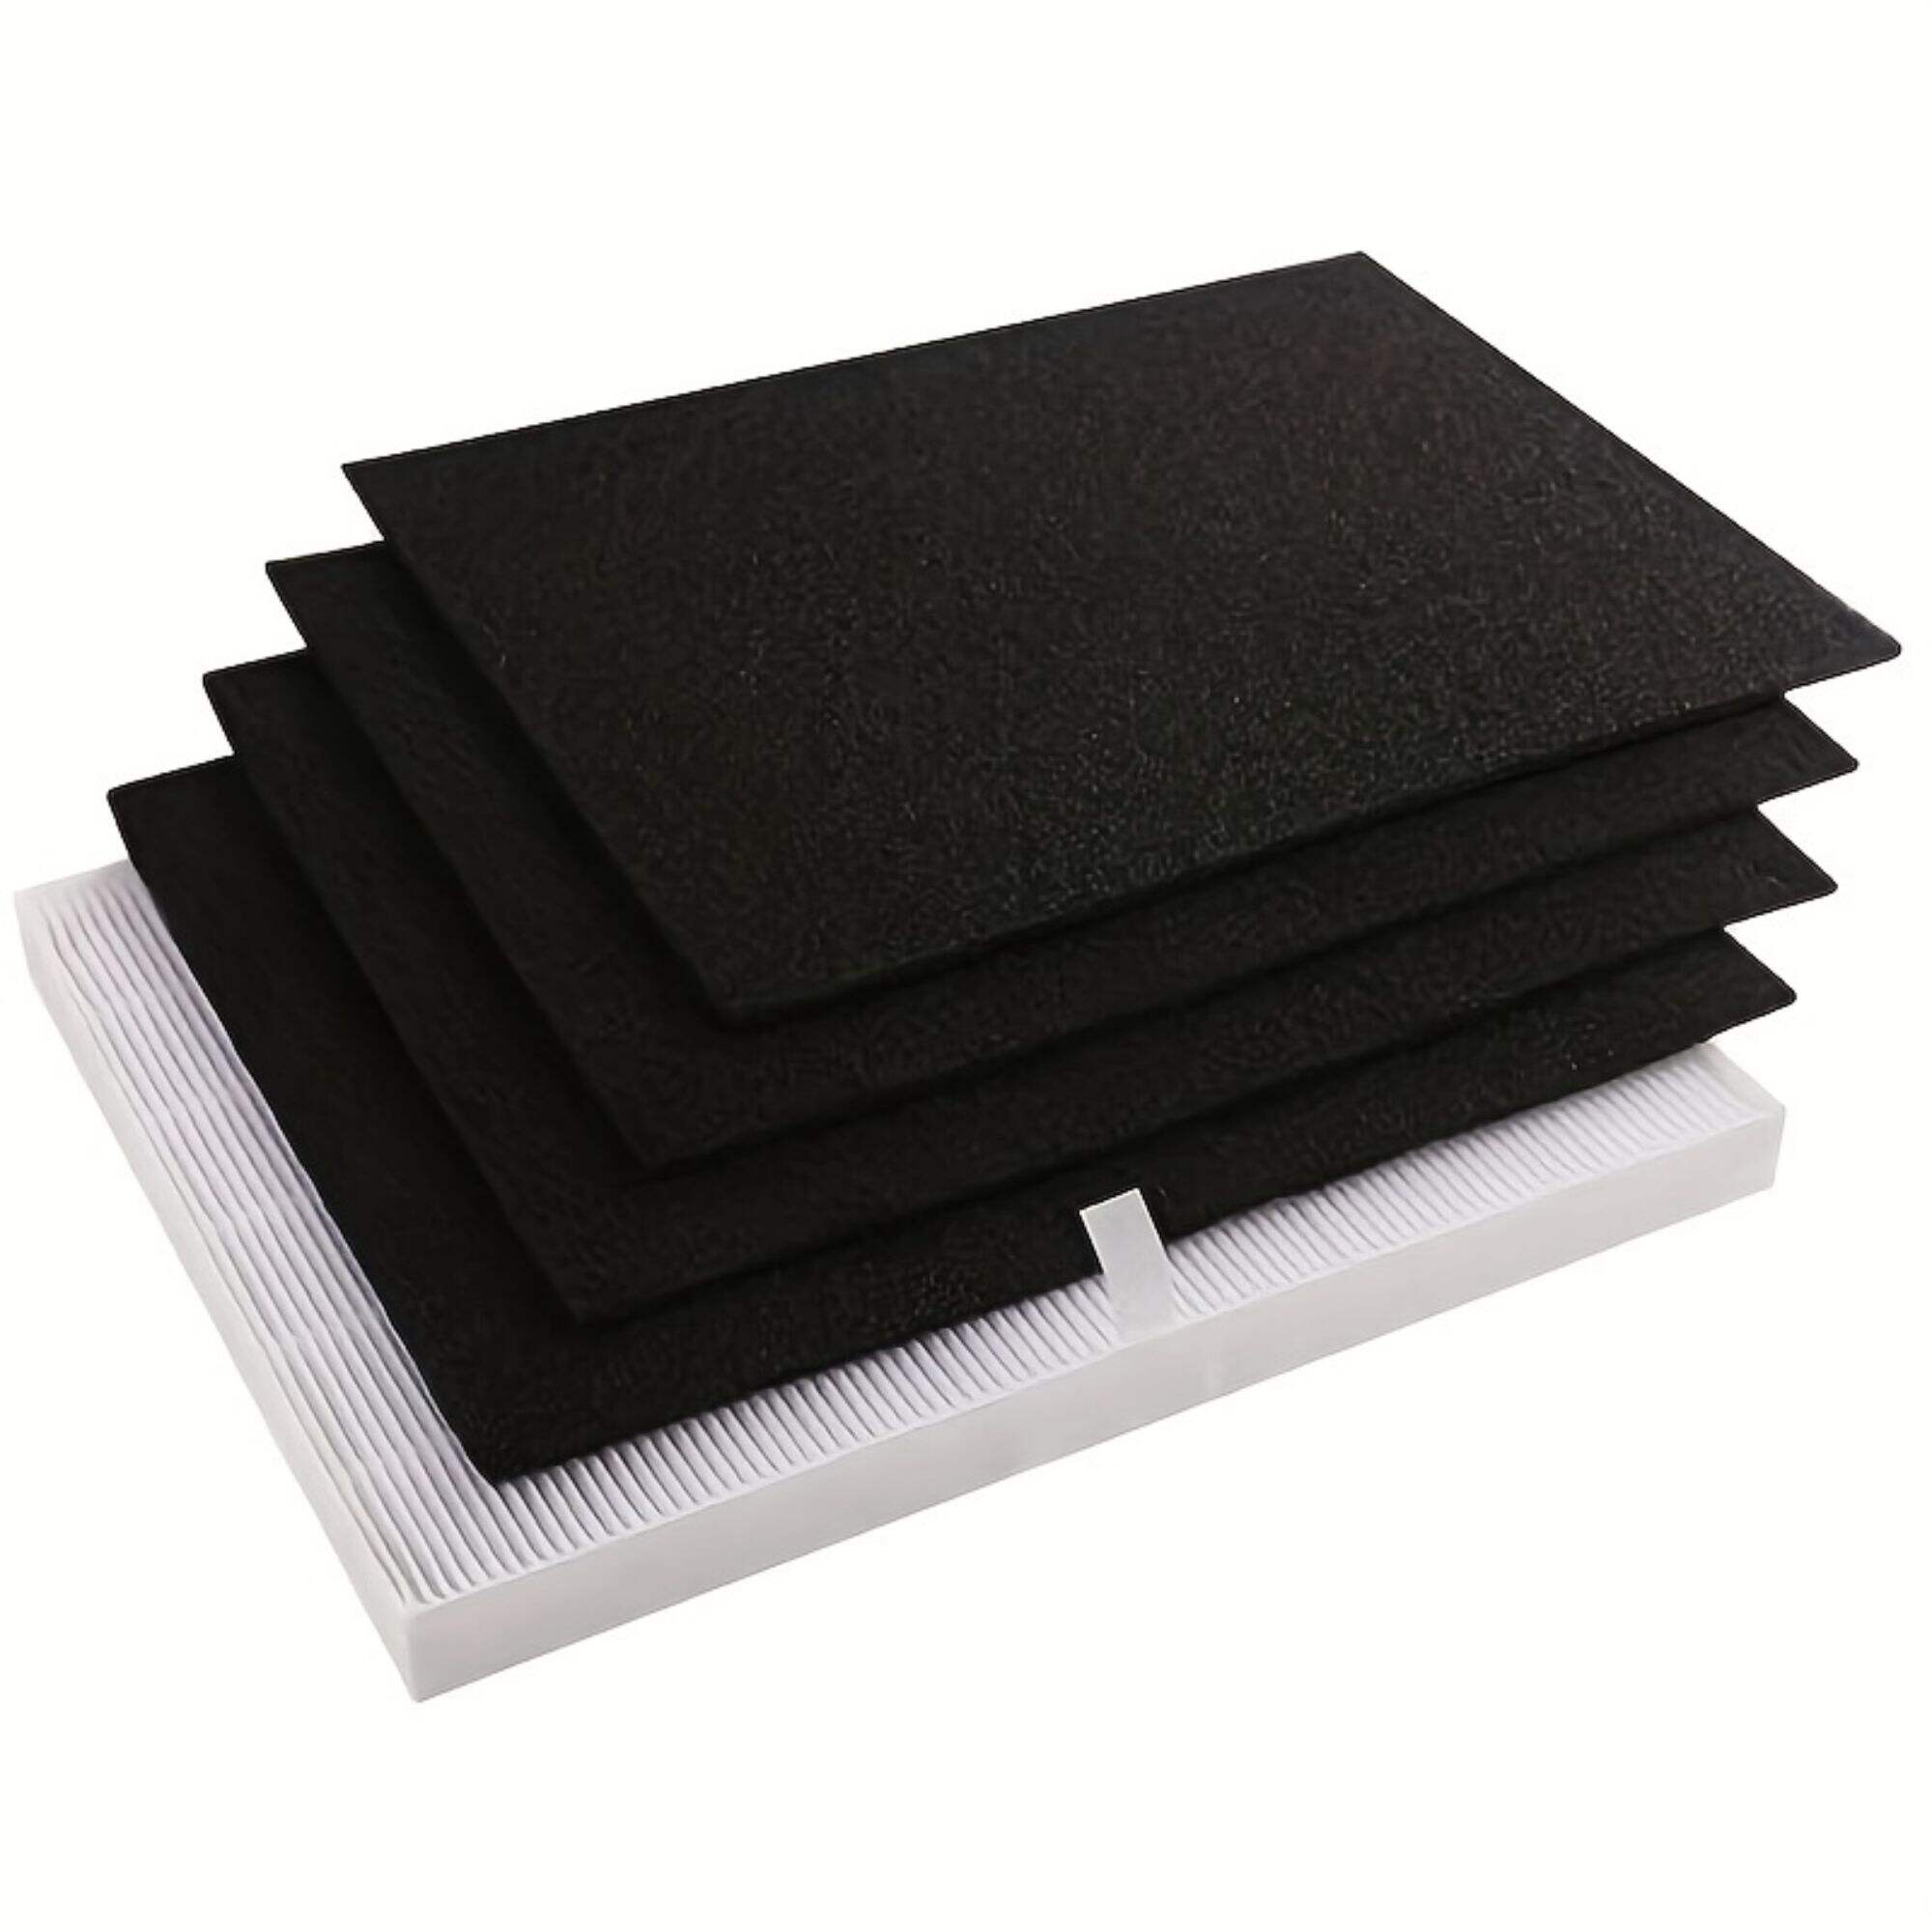 Effective True Hepa Replacement Filter for Winix C545 H13 Grade Hepa Filter Activated Carbon Filter